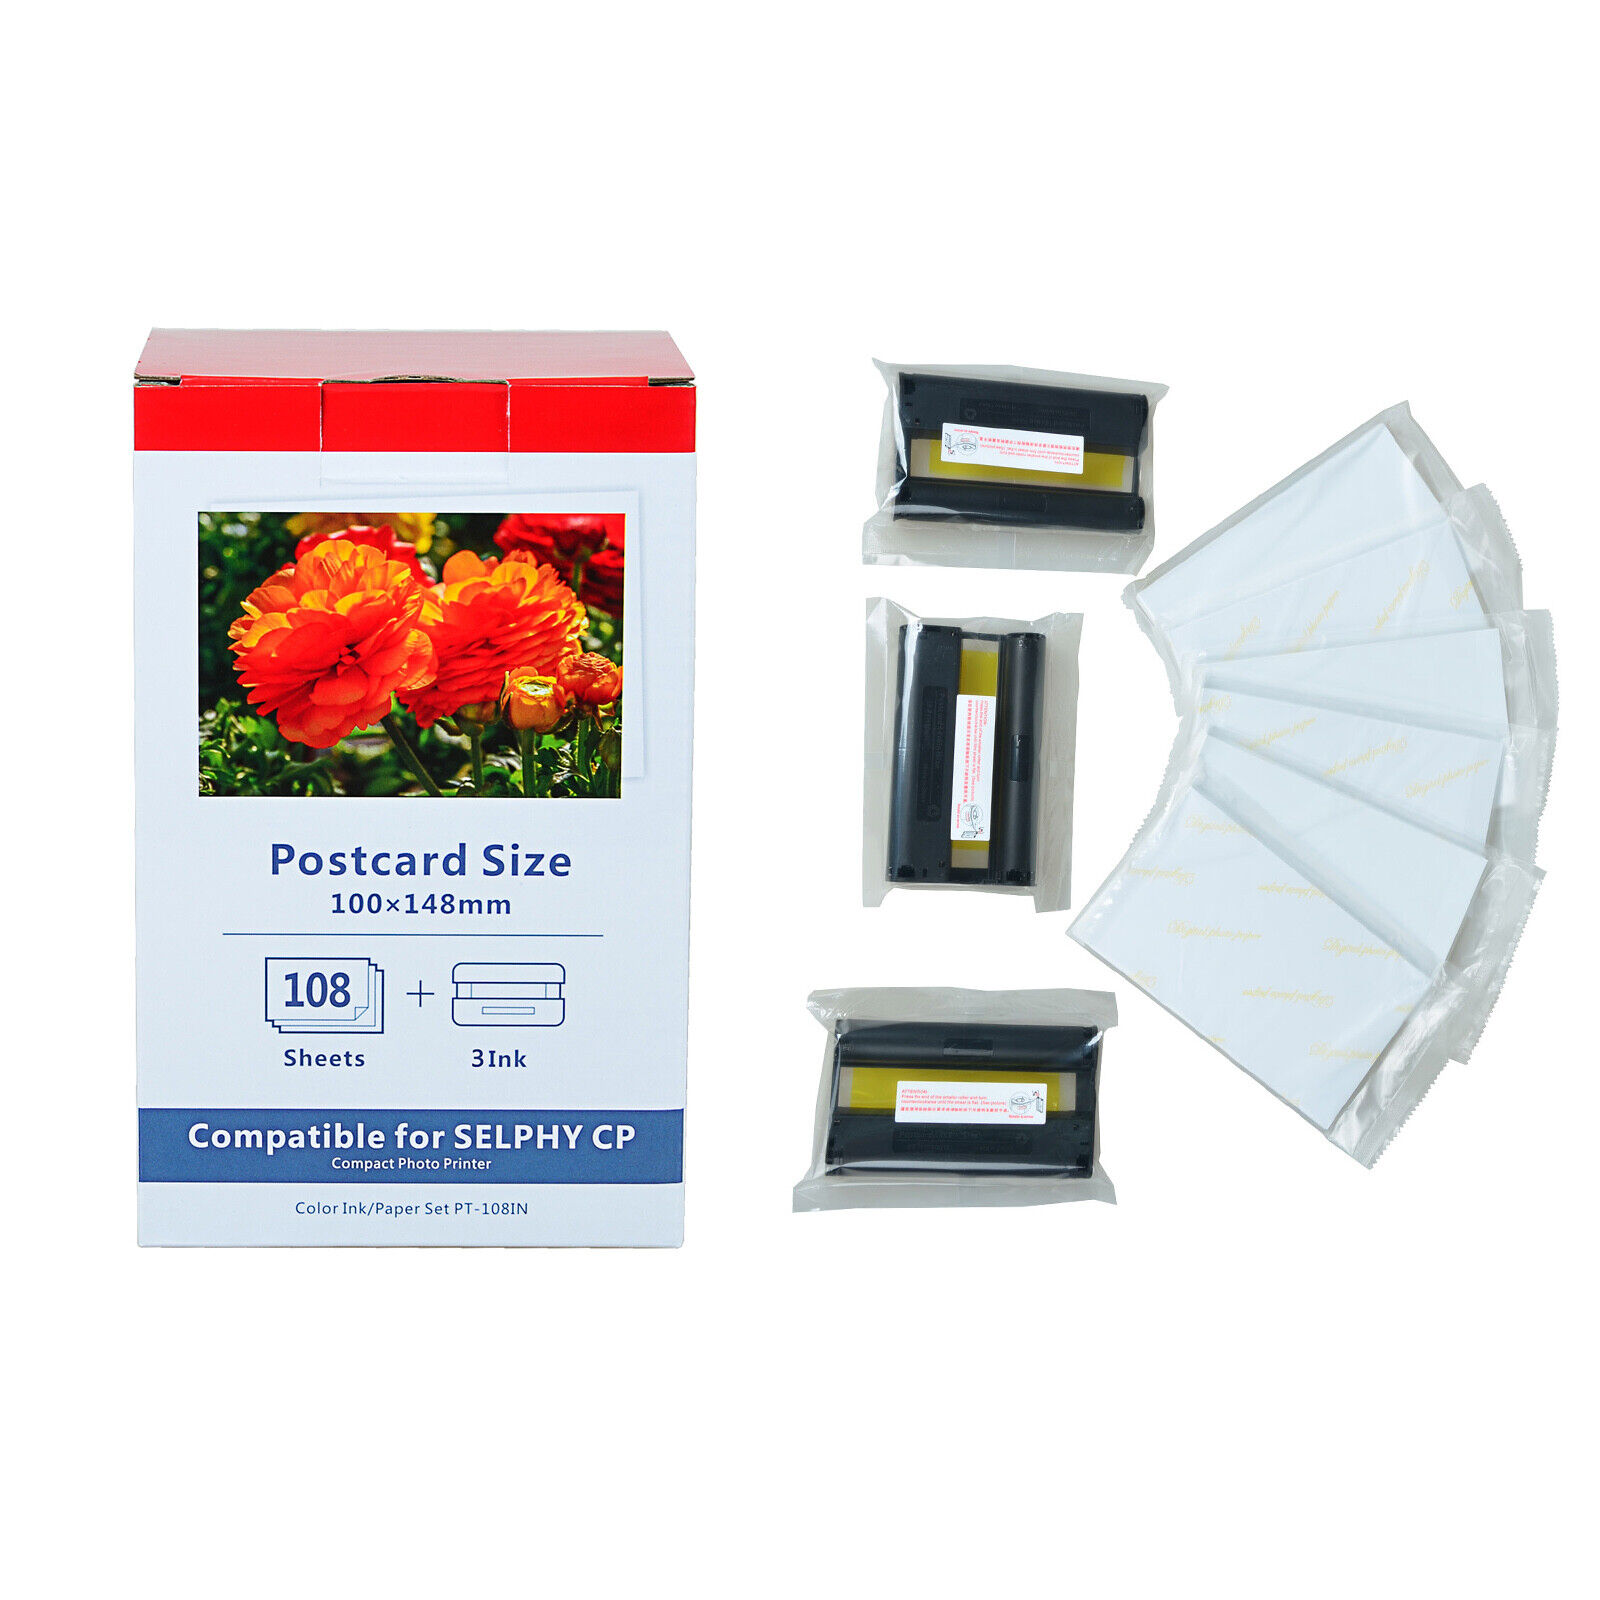 Fits Canon Selphy CP600 CP900 KP-108IN Color Inks 3115B001 + 4X6 Photo Paper Set